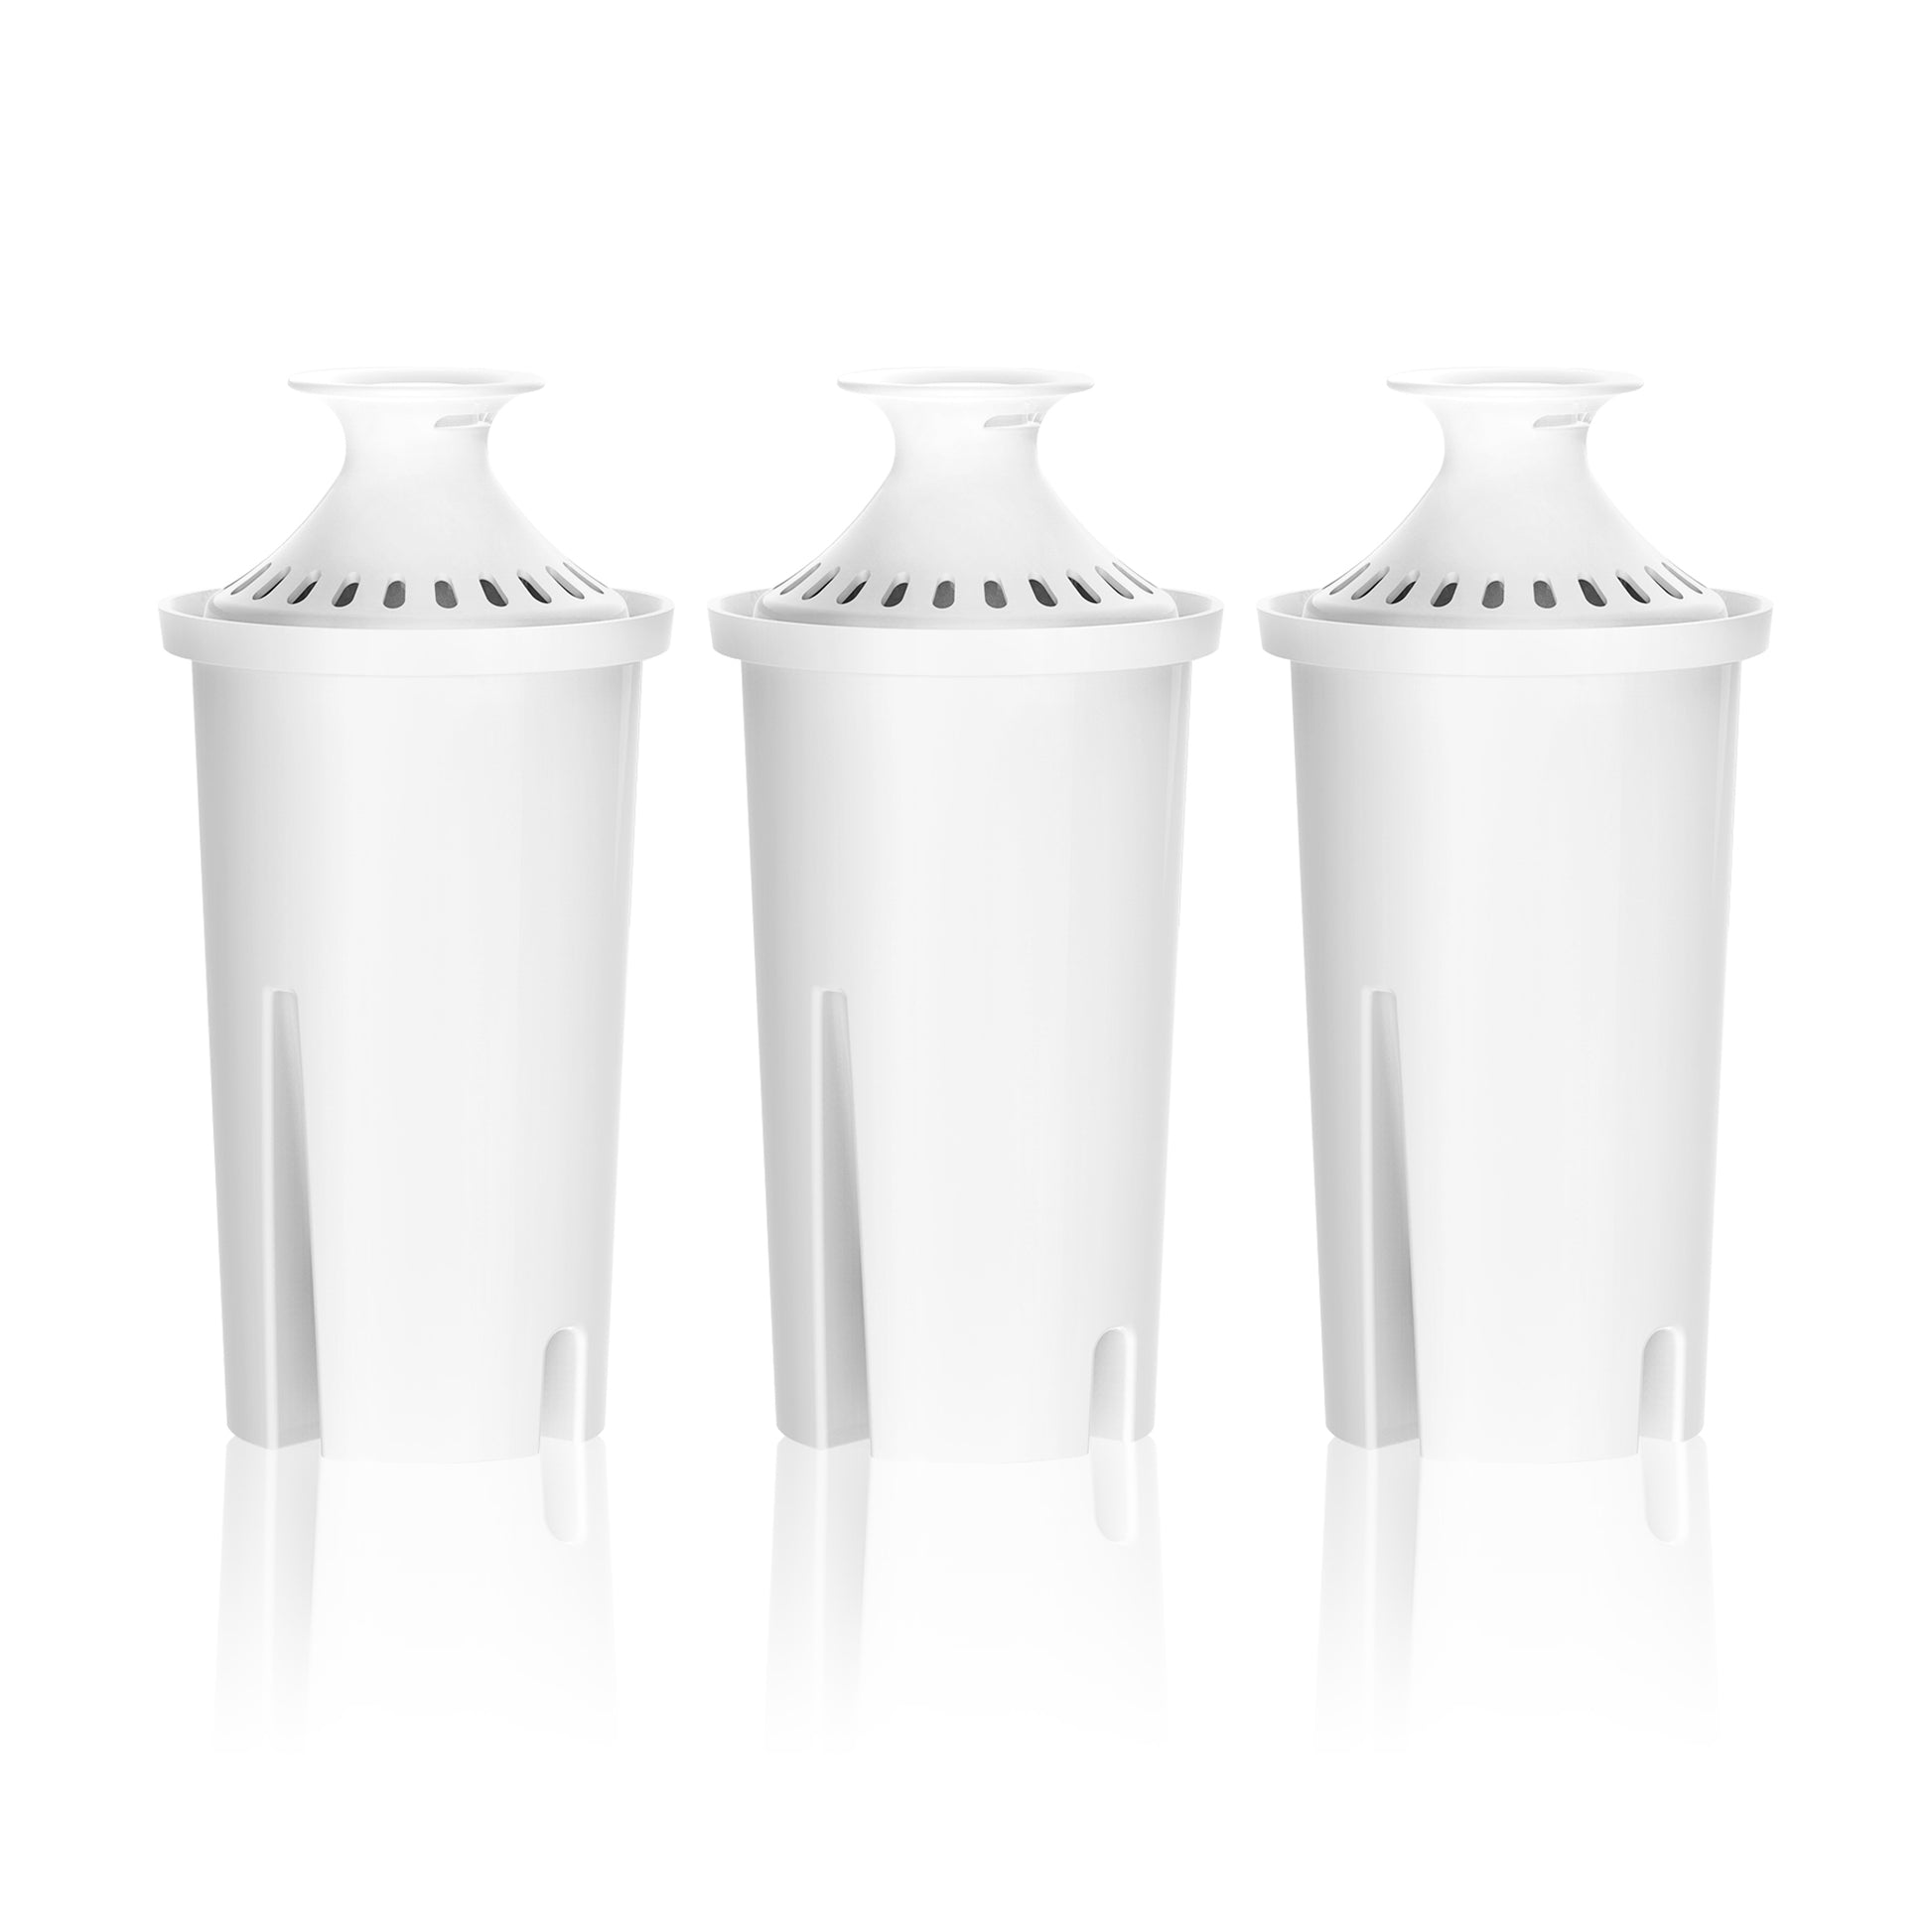 AQUA CREST Replacement for Brita® Pitchers and Dispensers, 3 Count